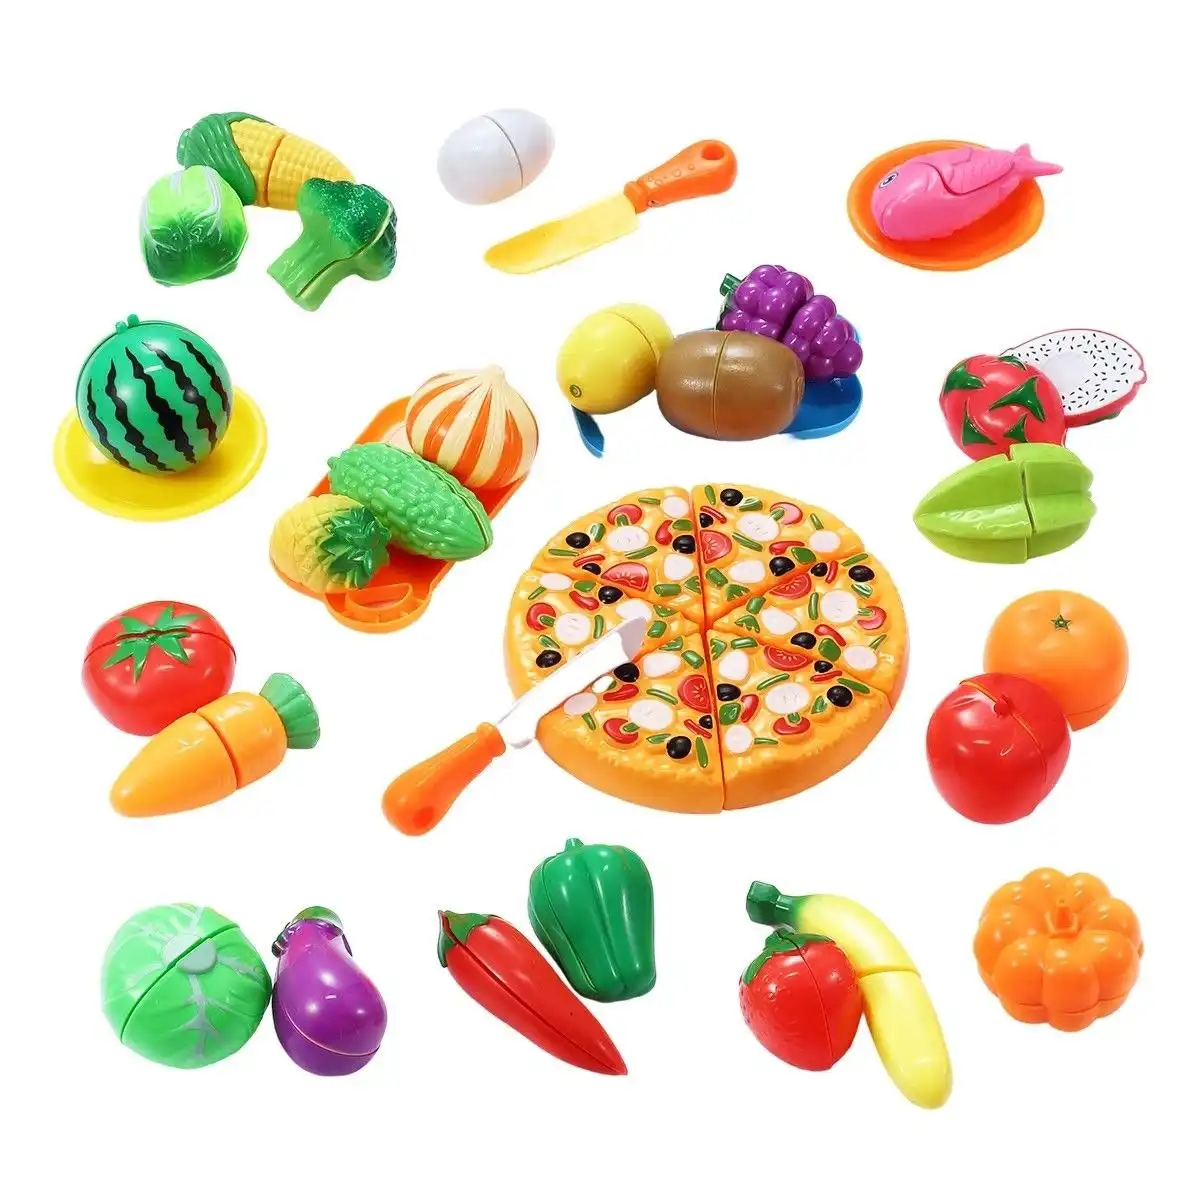 Ausway 62 Pieces Kitchen Pretend Play Food Set for Kids Cutting Fruits Vegetables Pizza Toys Set